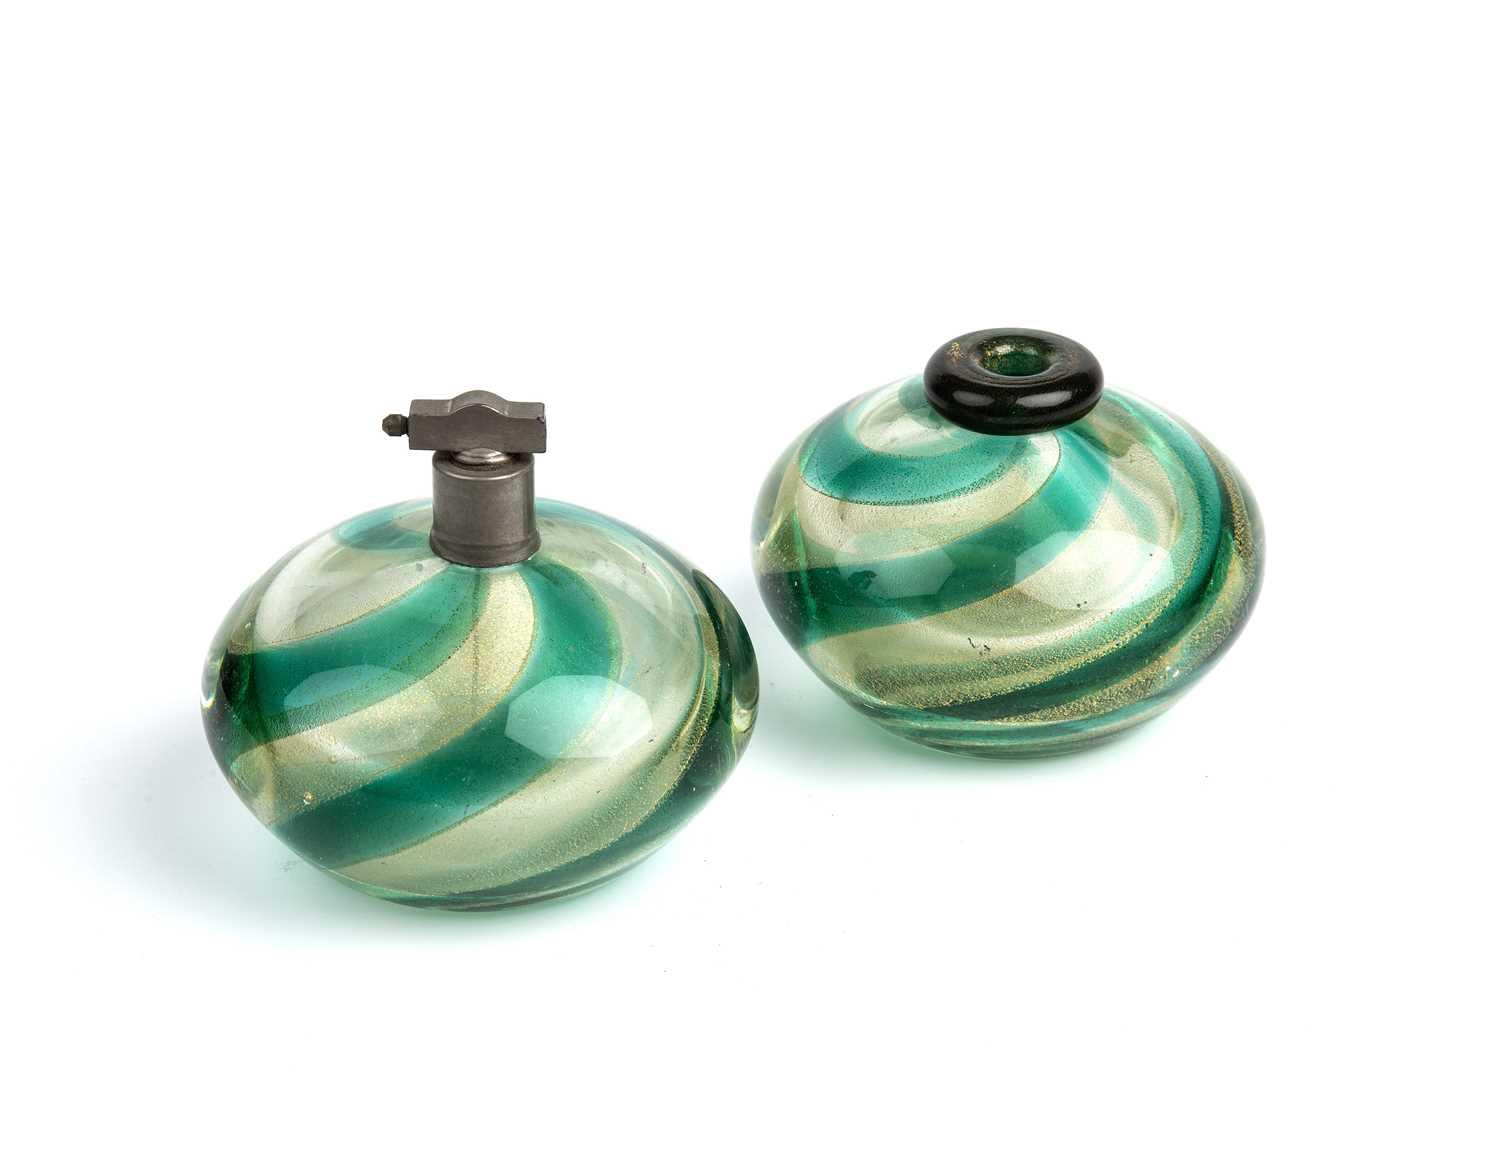 Art Deco Two vases, probably French glass, with a swirled pattern in green and gold 10cm high.